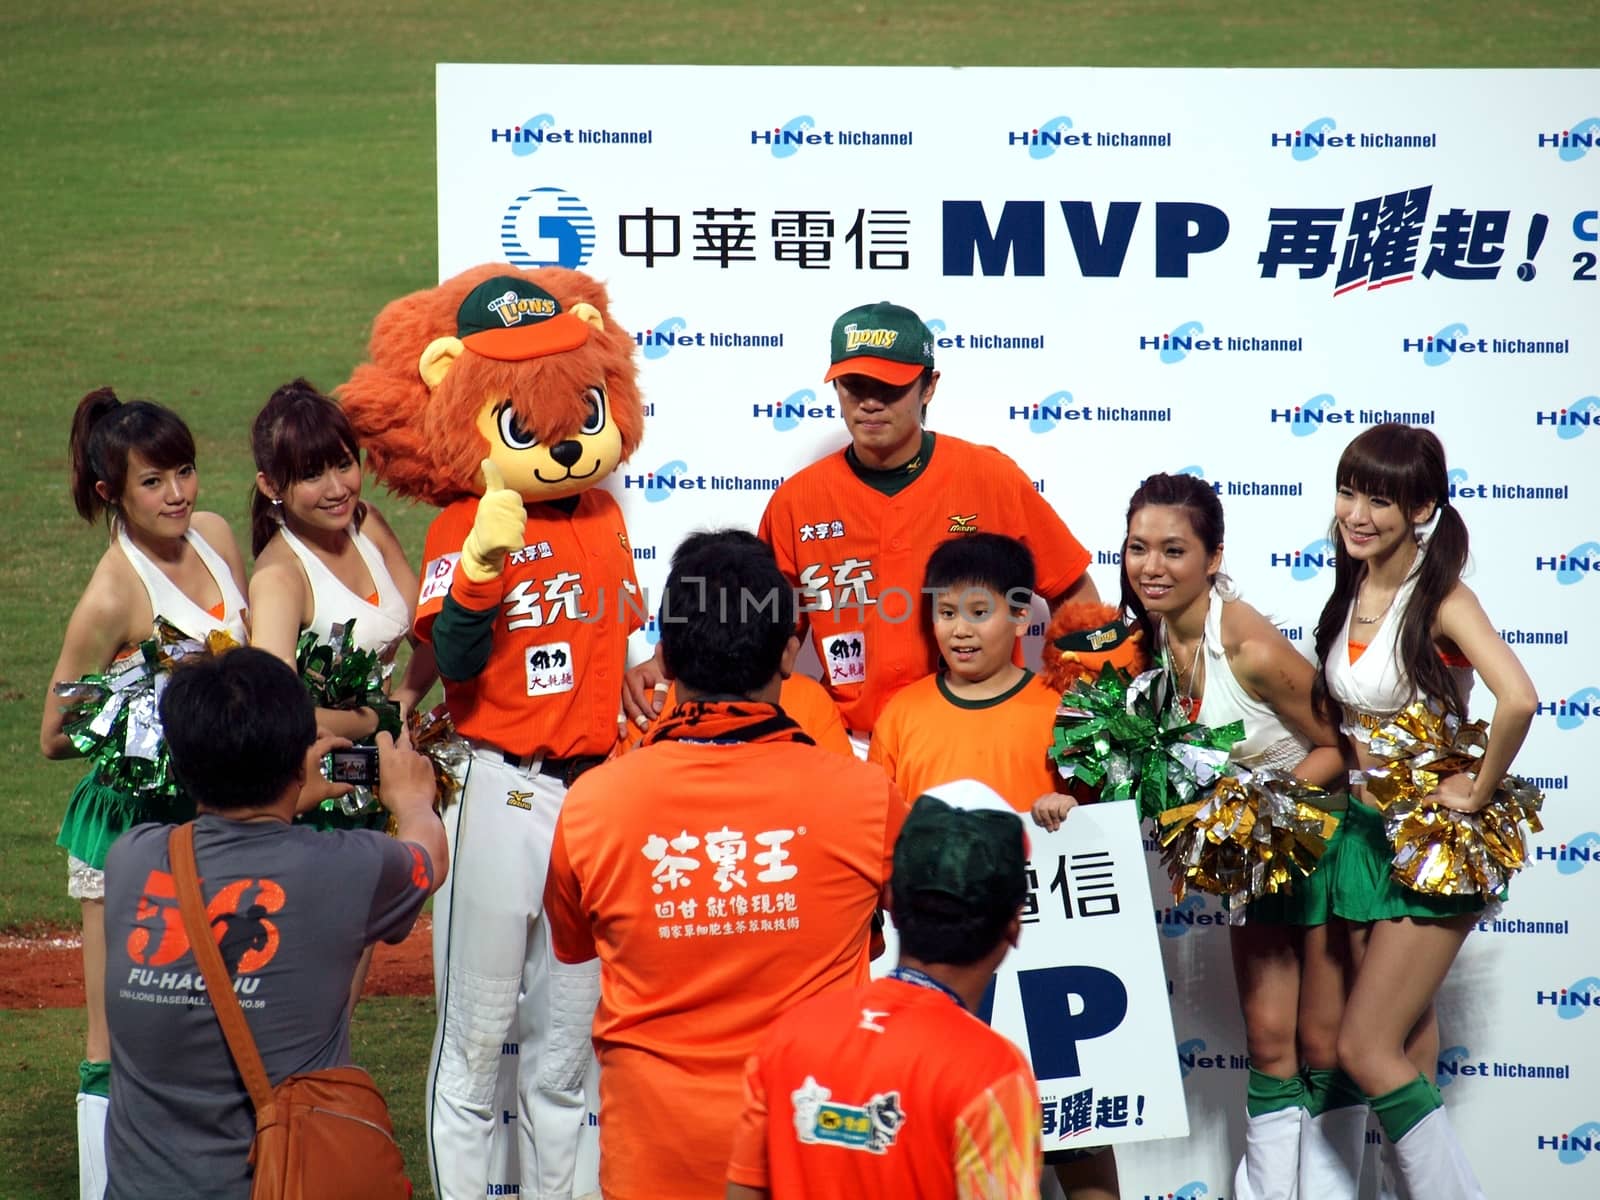 PINGTUNG, TAIWAN, APRIL 8: Mr. Guo of the President Lions receives the Most Valuable Player Award after a Pro Baseball League game against the Lamigo Monkeys. The Lions won 2:0 on April 8, 2012 in Pingtung.  